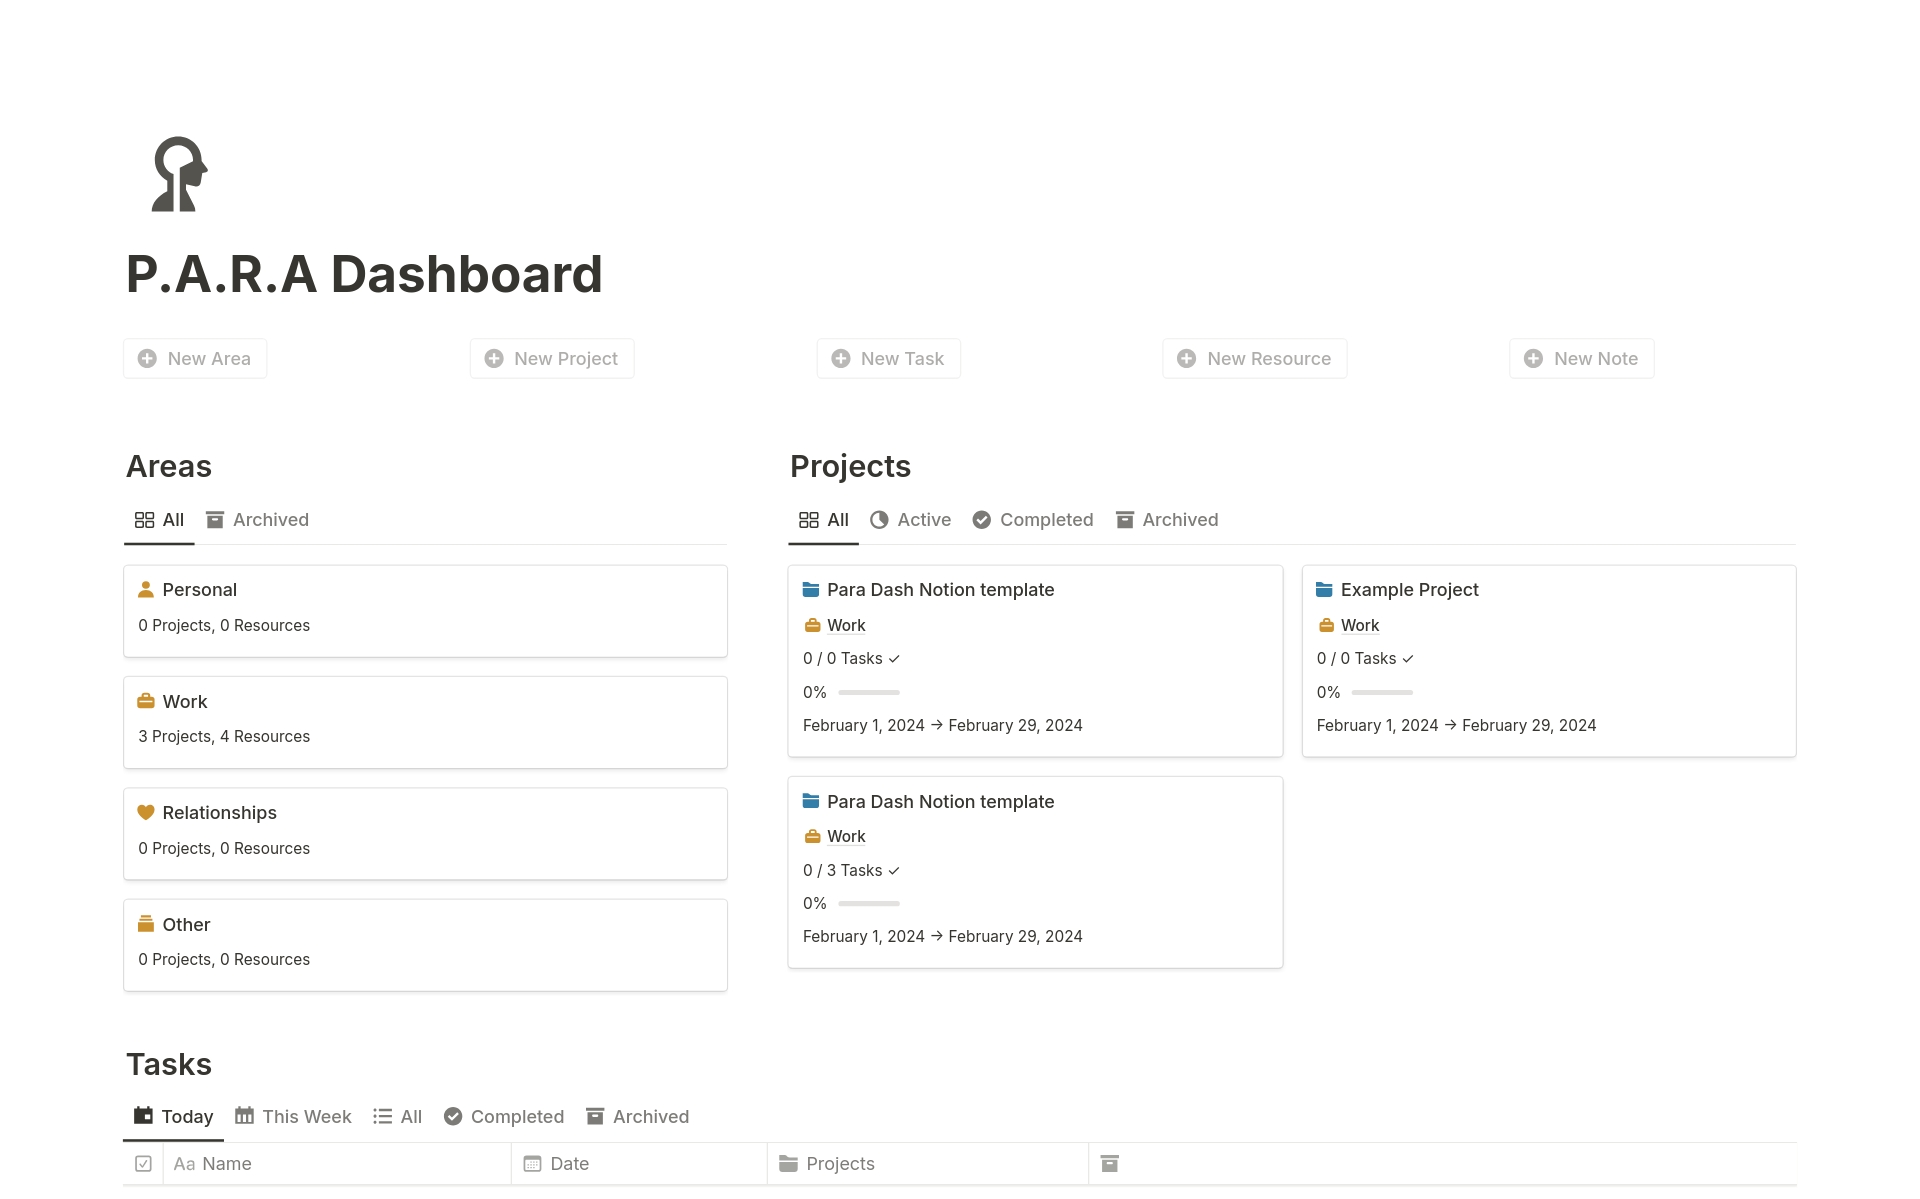 Effortlessly manage your Tasks, Projects, Resources and notes in one place